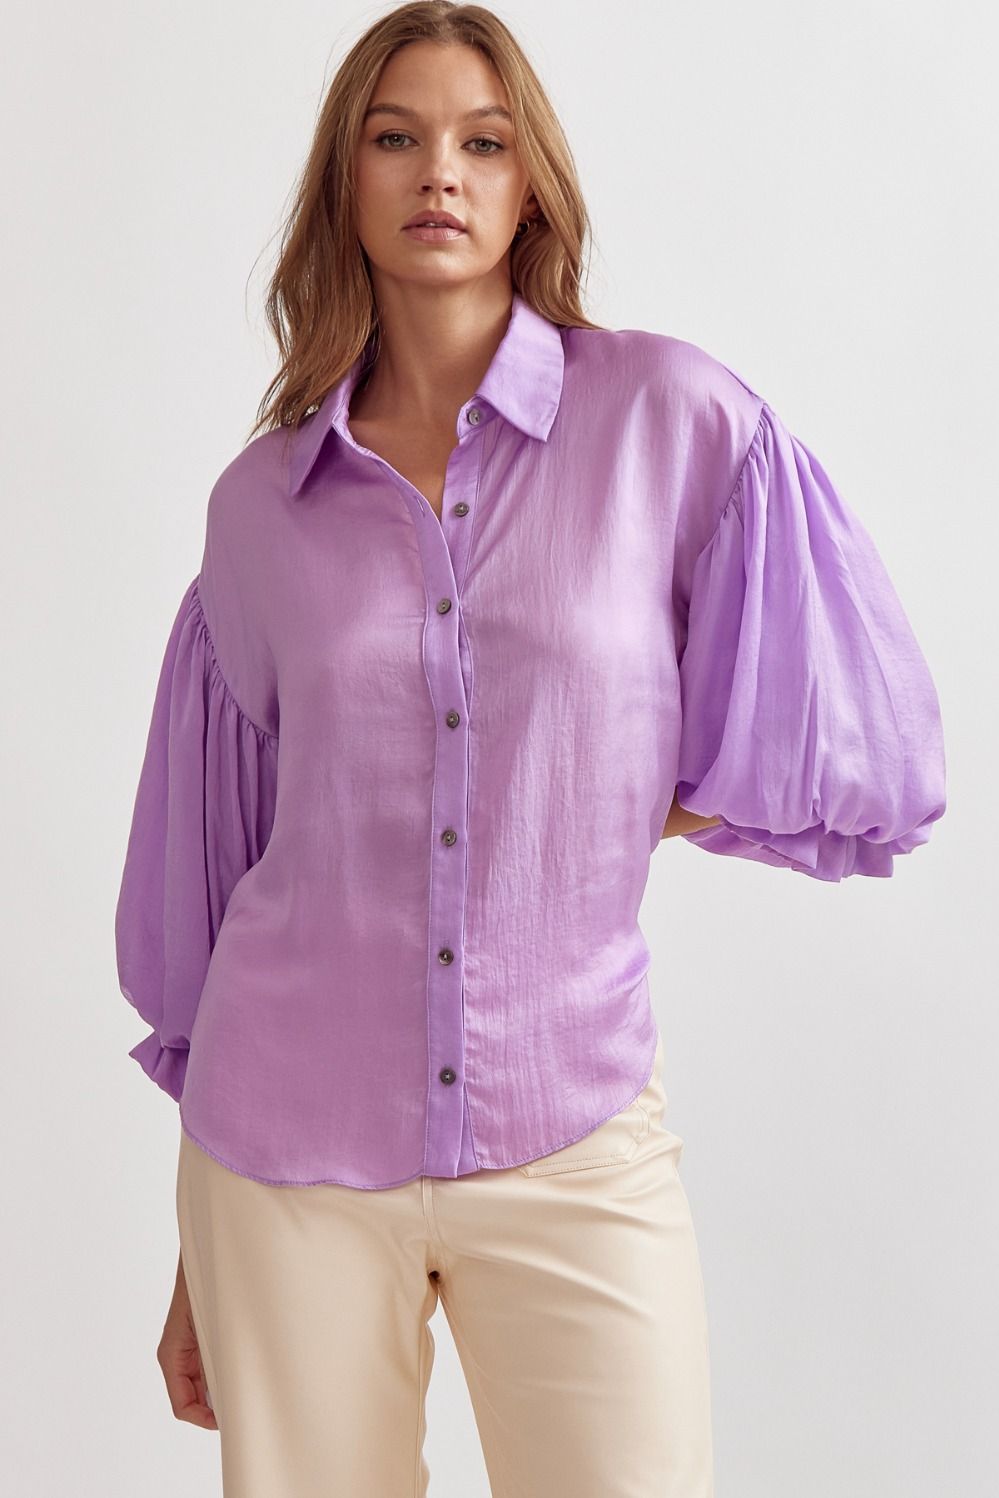 Satin Bubble Sleeve Collared Top | Lavender